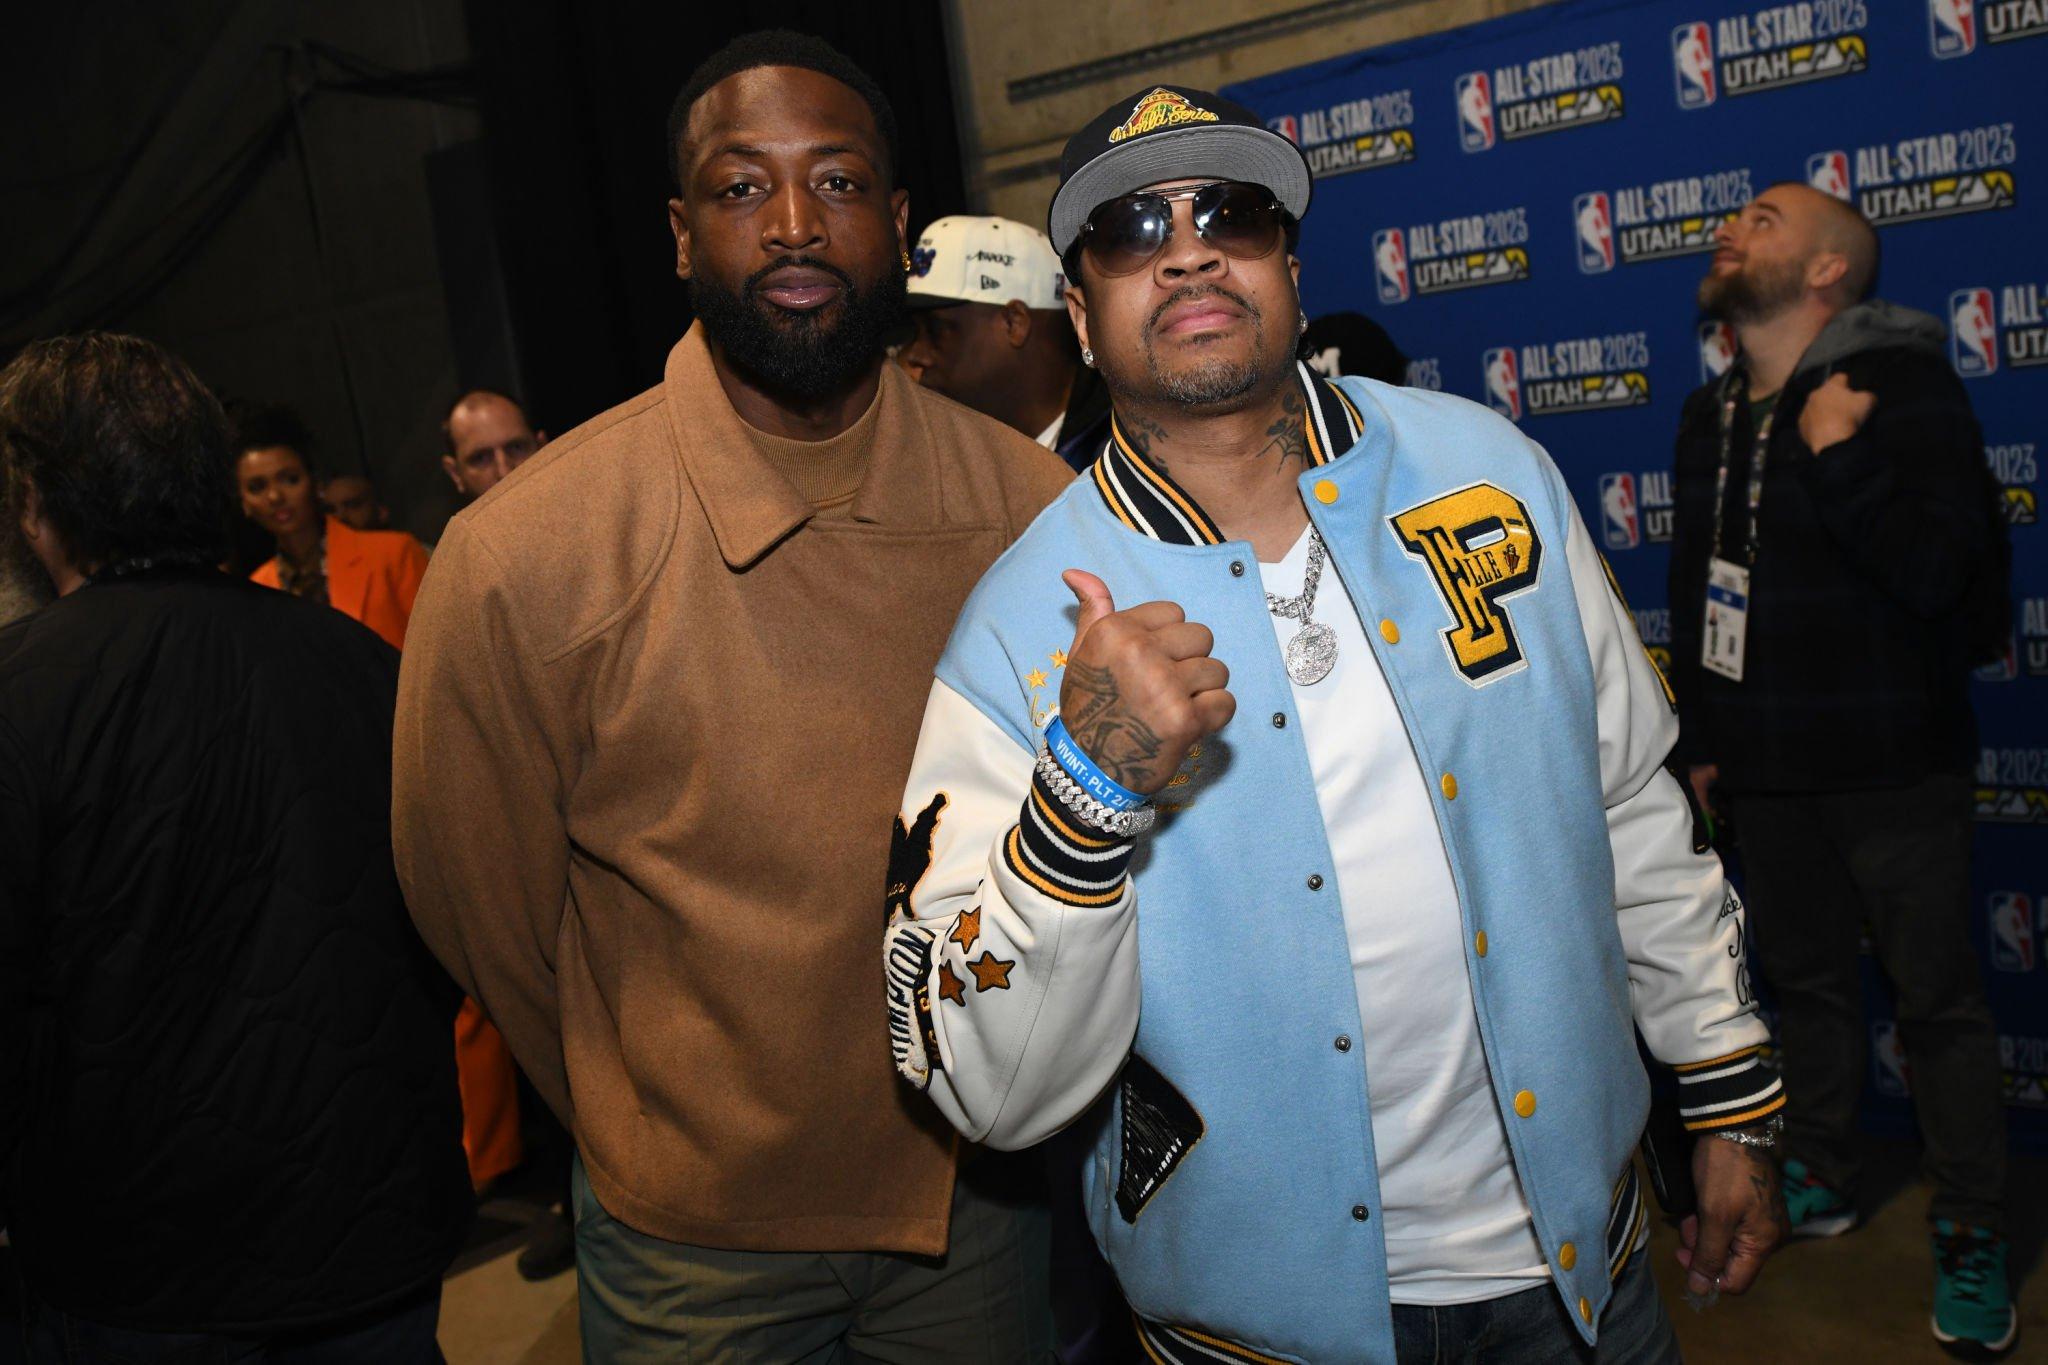 SALT LAKE CITY, UT - FEBRUARY 19: Dwyane Wade and Allen Iverson poses for a photo during the NBA All-Star Game as part of 2023 NBA All Star Weekend on Sunday, February 19, 2023 at Vivint Arena in Salt Lake City, Utah. NOTE TO USER: User expressly acknowledges and agrees that, by downloading and/or using this Photograph, user is consenting to the terms and conditions of the Getty Images License Agreement. Mandatory Copyright Notice: Copyright 2023 NBAE (Photo by Tom OConnor/NBAE via Getty Images)